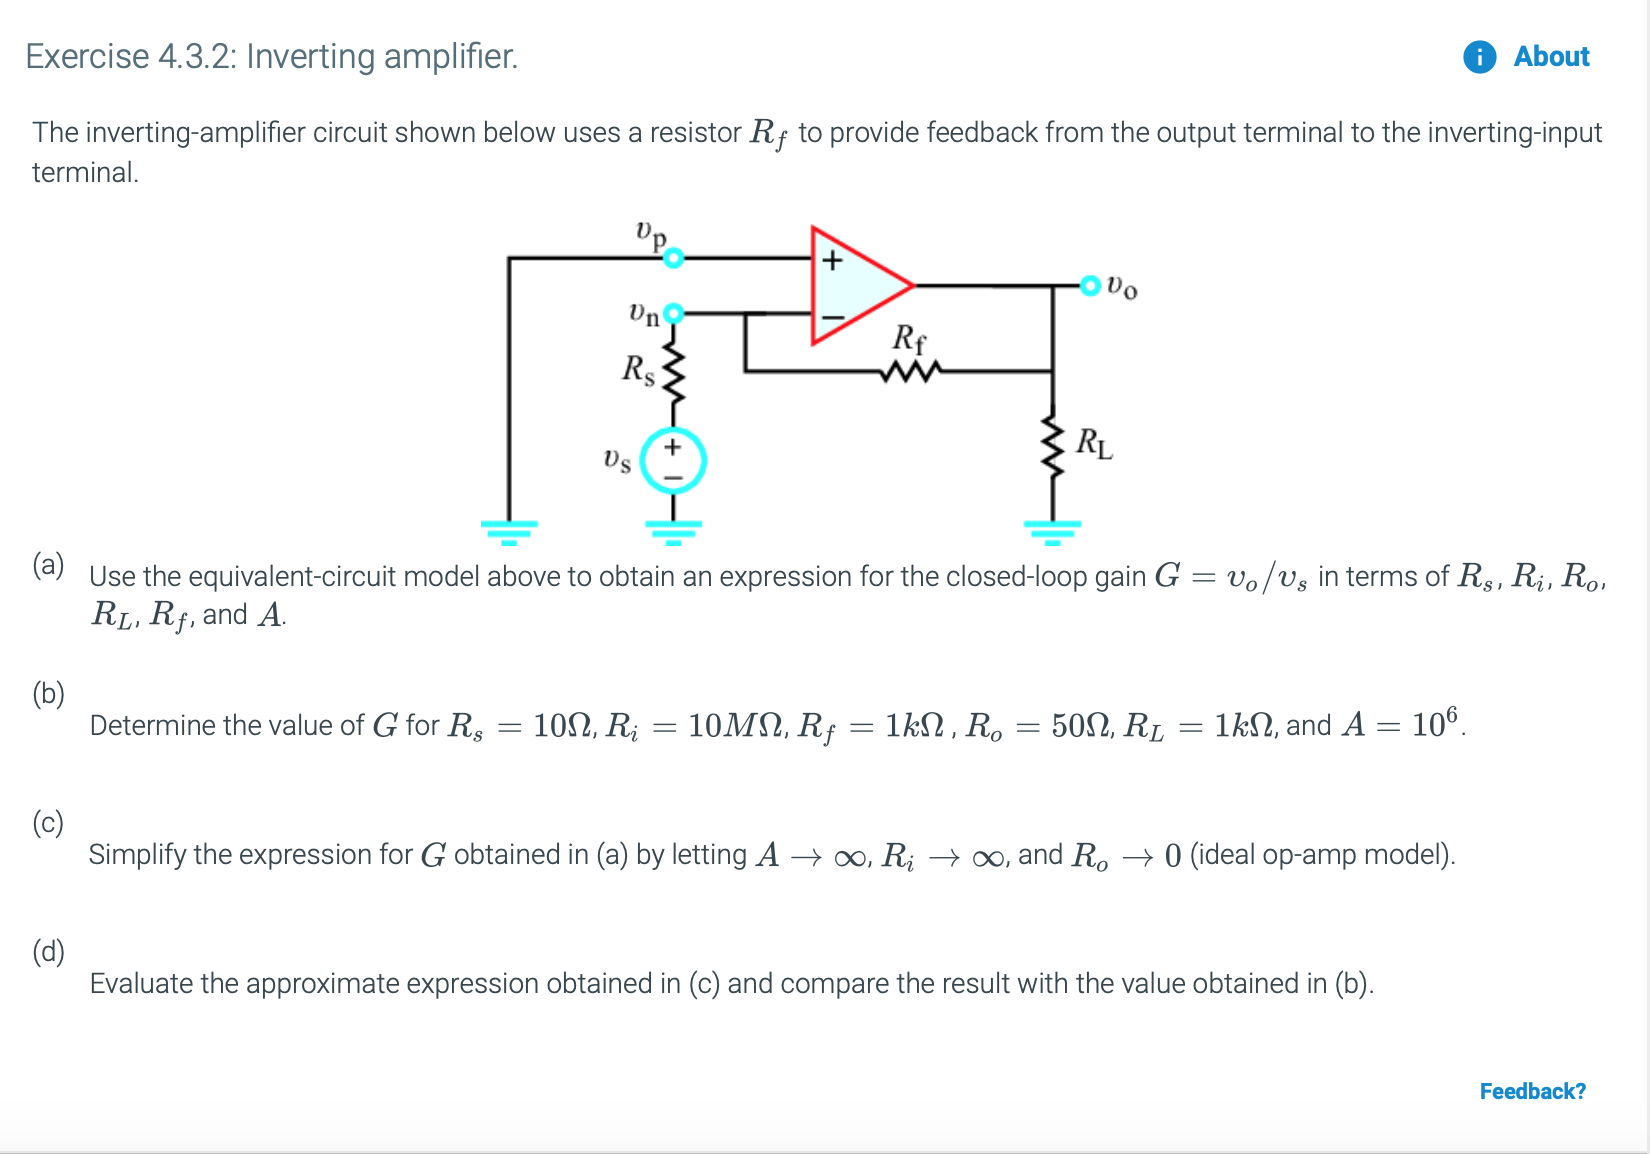 Exercise 4.3.2: Inverting amplifier.
About
The inverting-amplifier circuit shown below uses a resistor Rf to provide feedback from the output terminal to the inverting-input
terminal
'p
Un
Rs
+
(aUse the equivalent-circuit model above to obtain an expression for the closed-loop gain G
RLI Rf, and A
vo/vs in terms of R, Ri, Ro,
(b)
Determine the value of G for R
106
10MΩ Rf 1kΩ, R,-50Ω, R,
10Ω, R
1k, and A
(c)
Simplify the expression for G obtained in (a) by letting A o0, Ri >oo, and Ro -->0 (ideal op-amp model)
(d)
Evaluate the approximate expression obtained in (c) and compare the result with the value obtained in (b)
Feedback?
